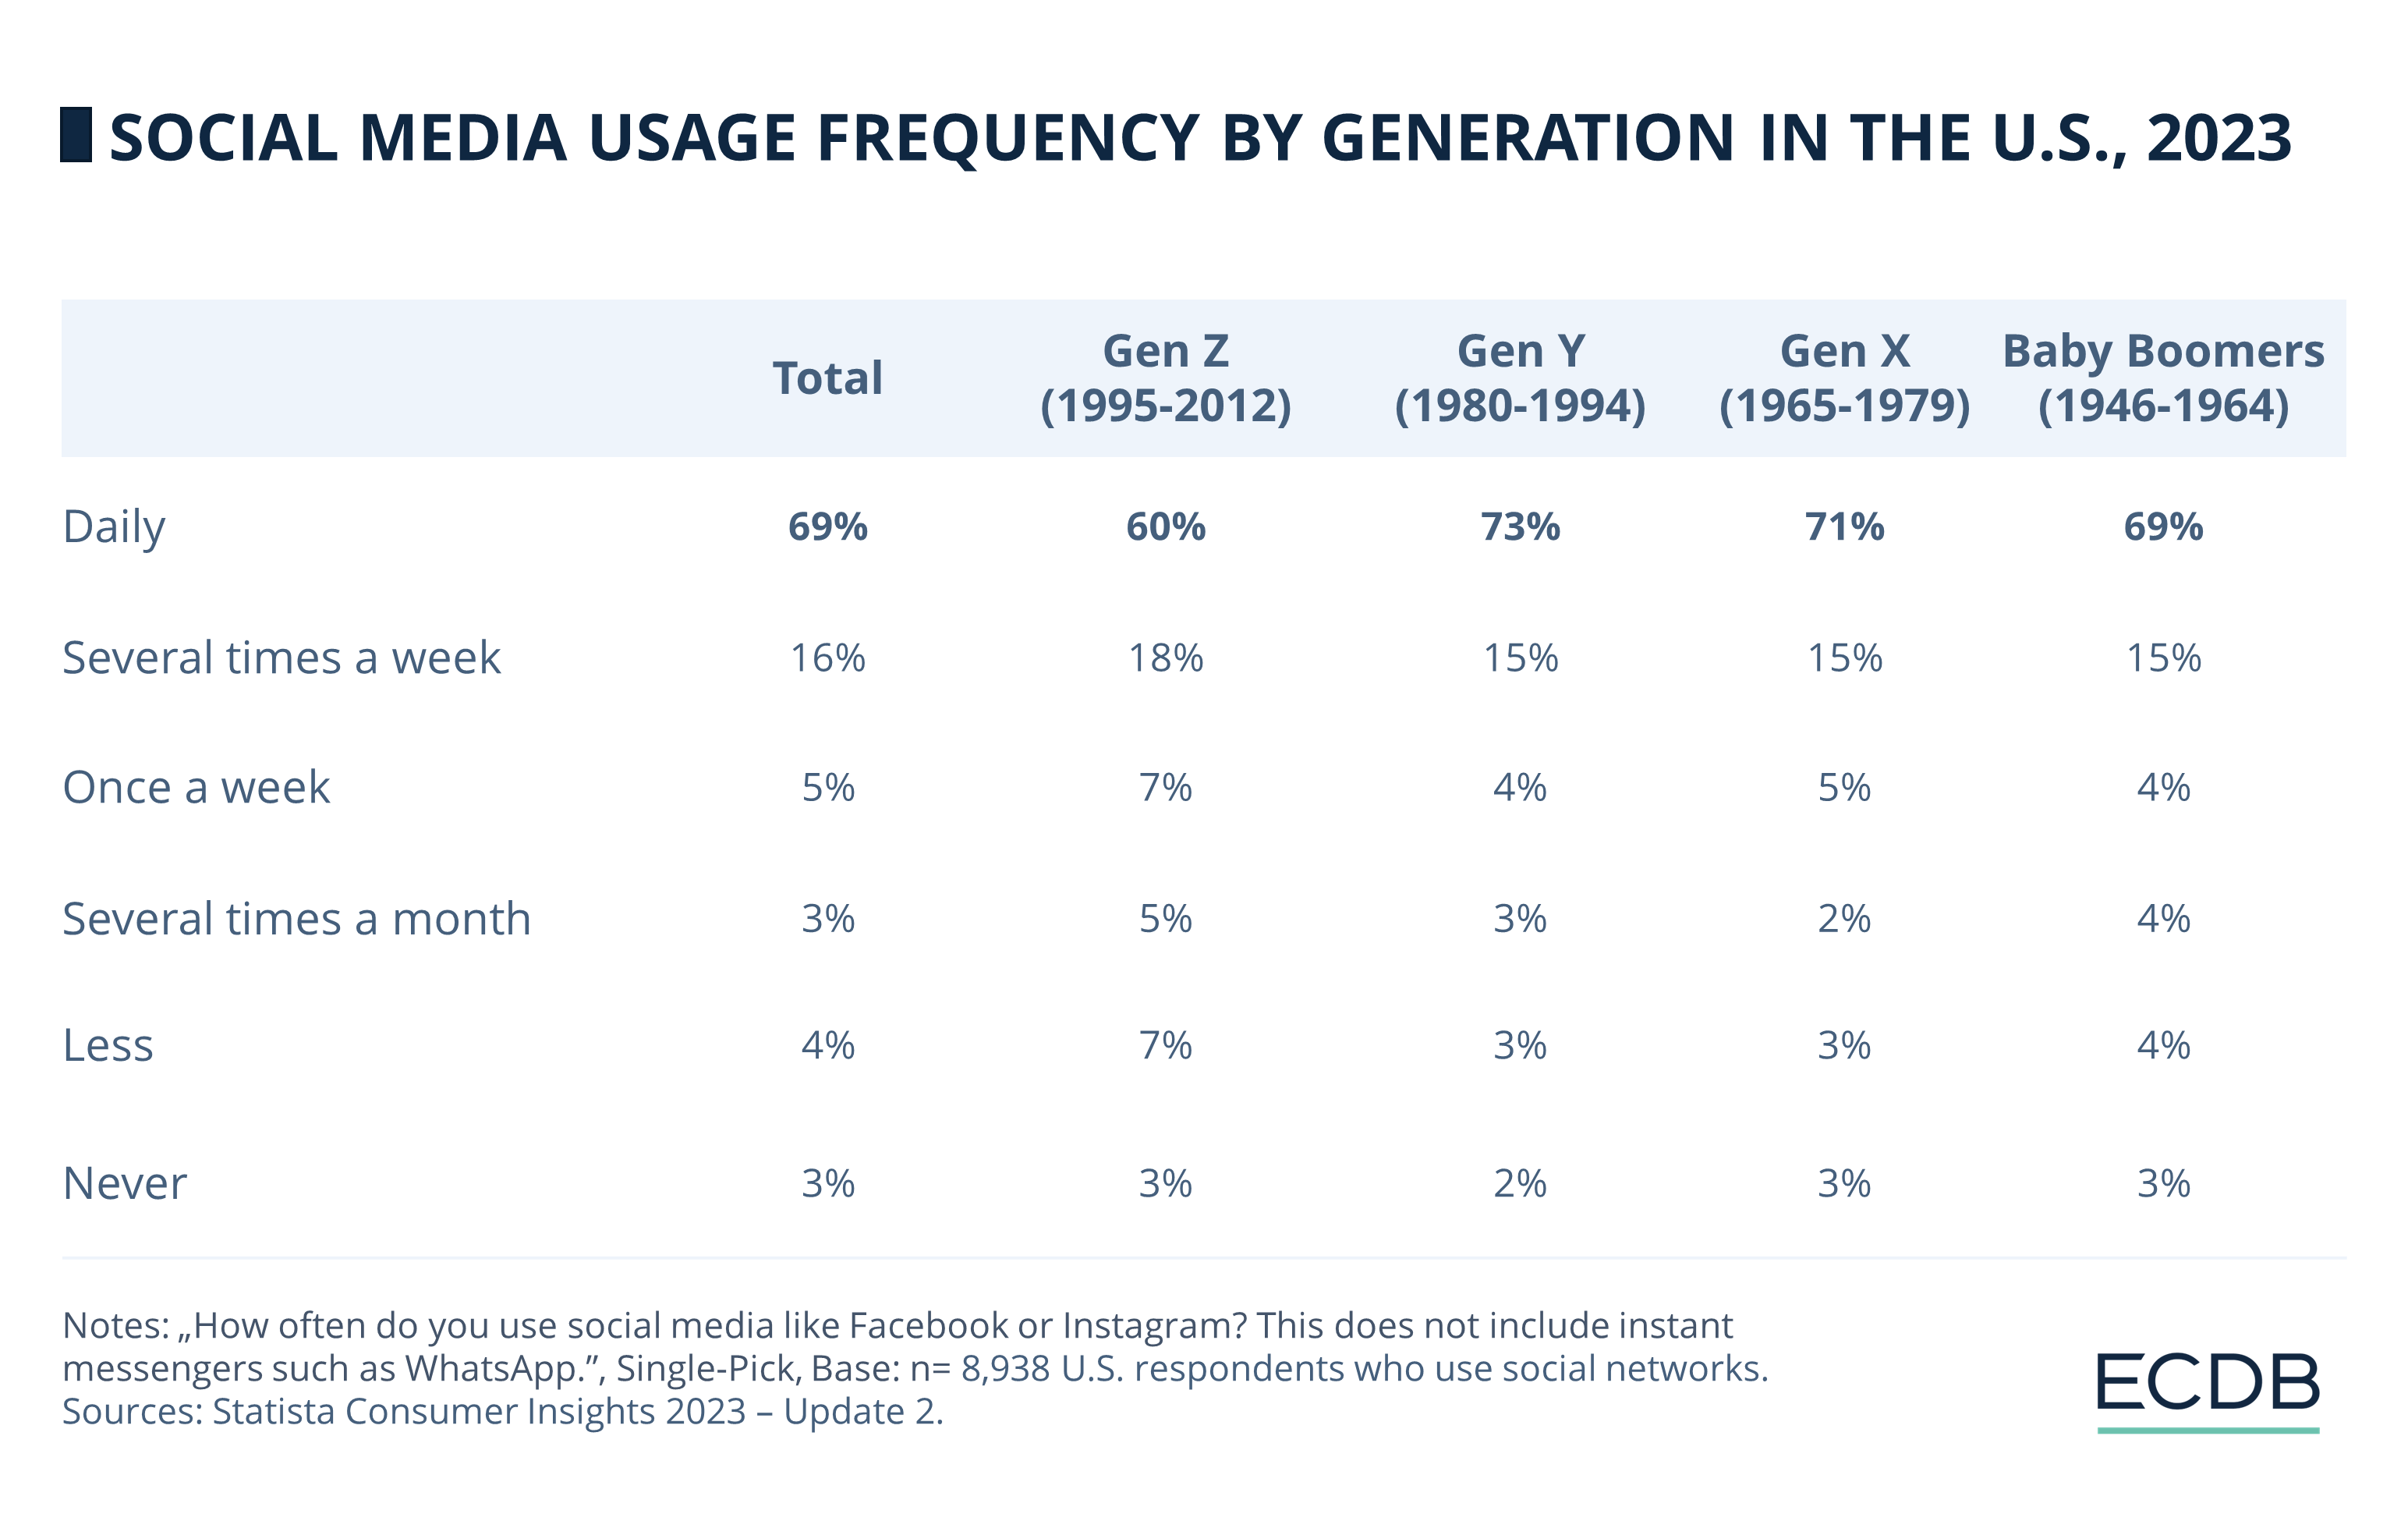 Social Media Usage Frequency by Generation in the U.S., 2023